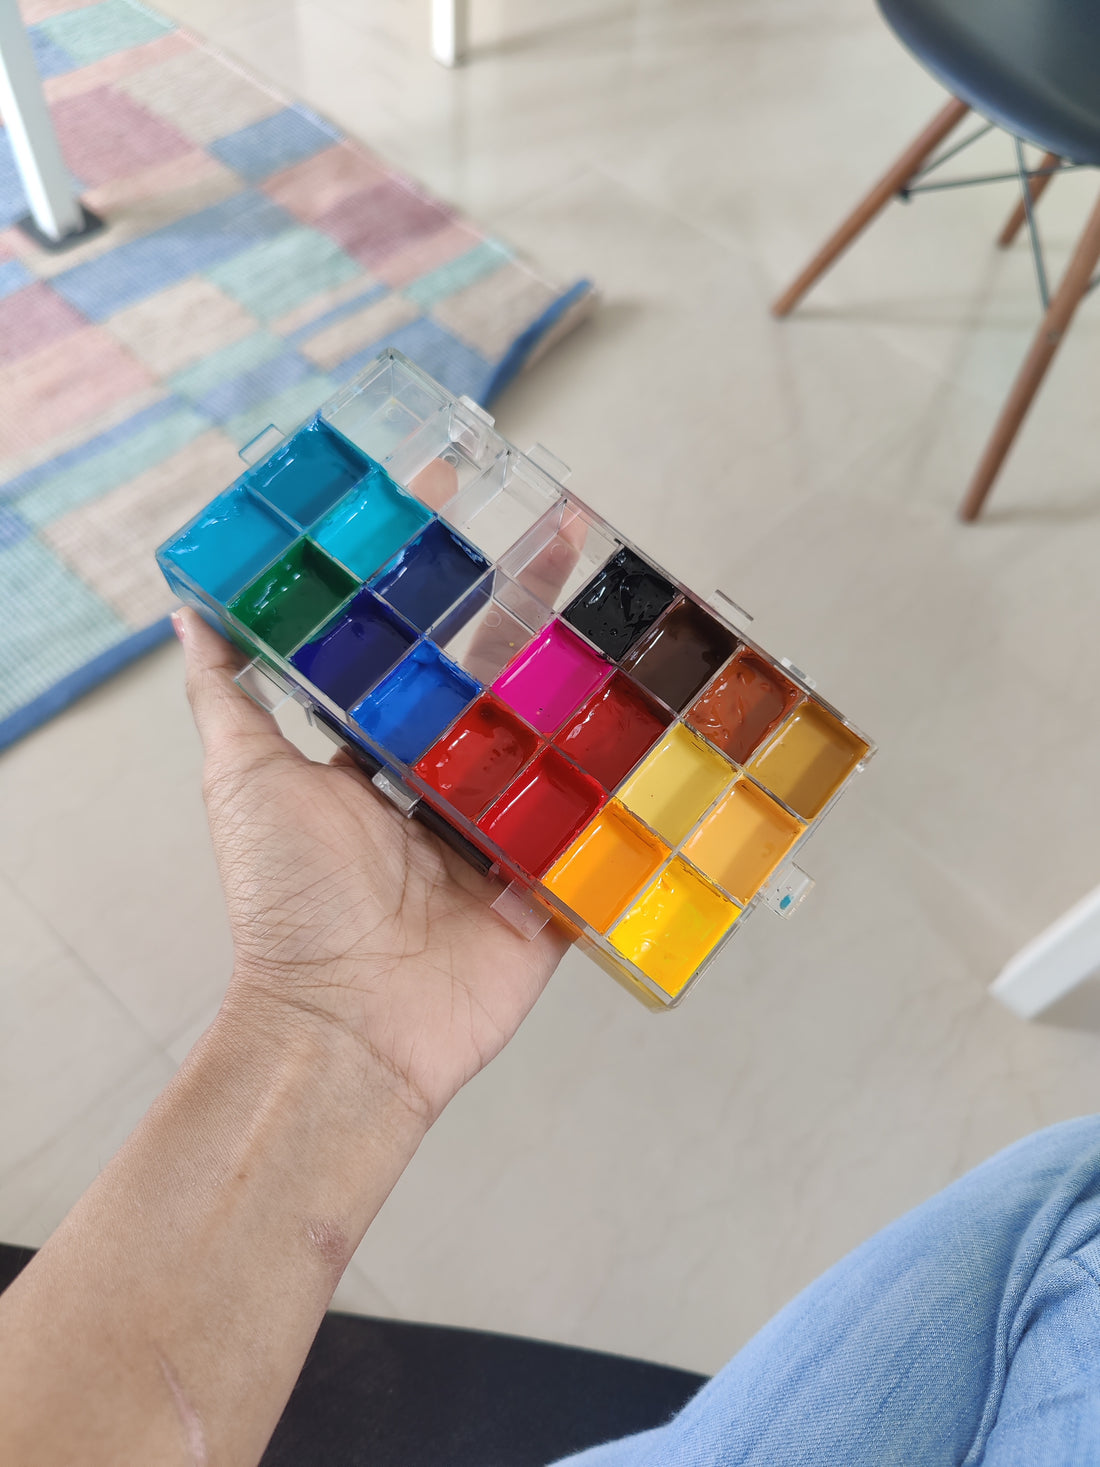 The Art of Palette TLC: Keeping Your Gouache Colors Happy and Vibrant